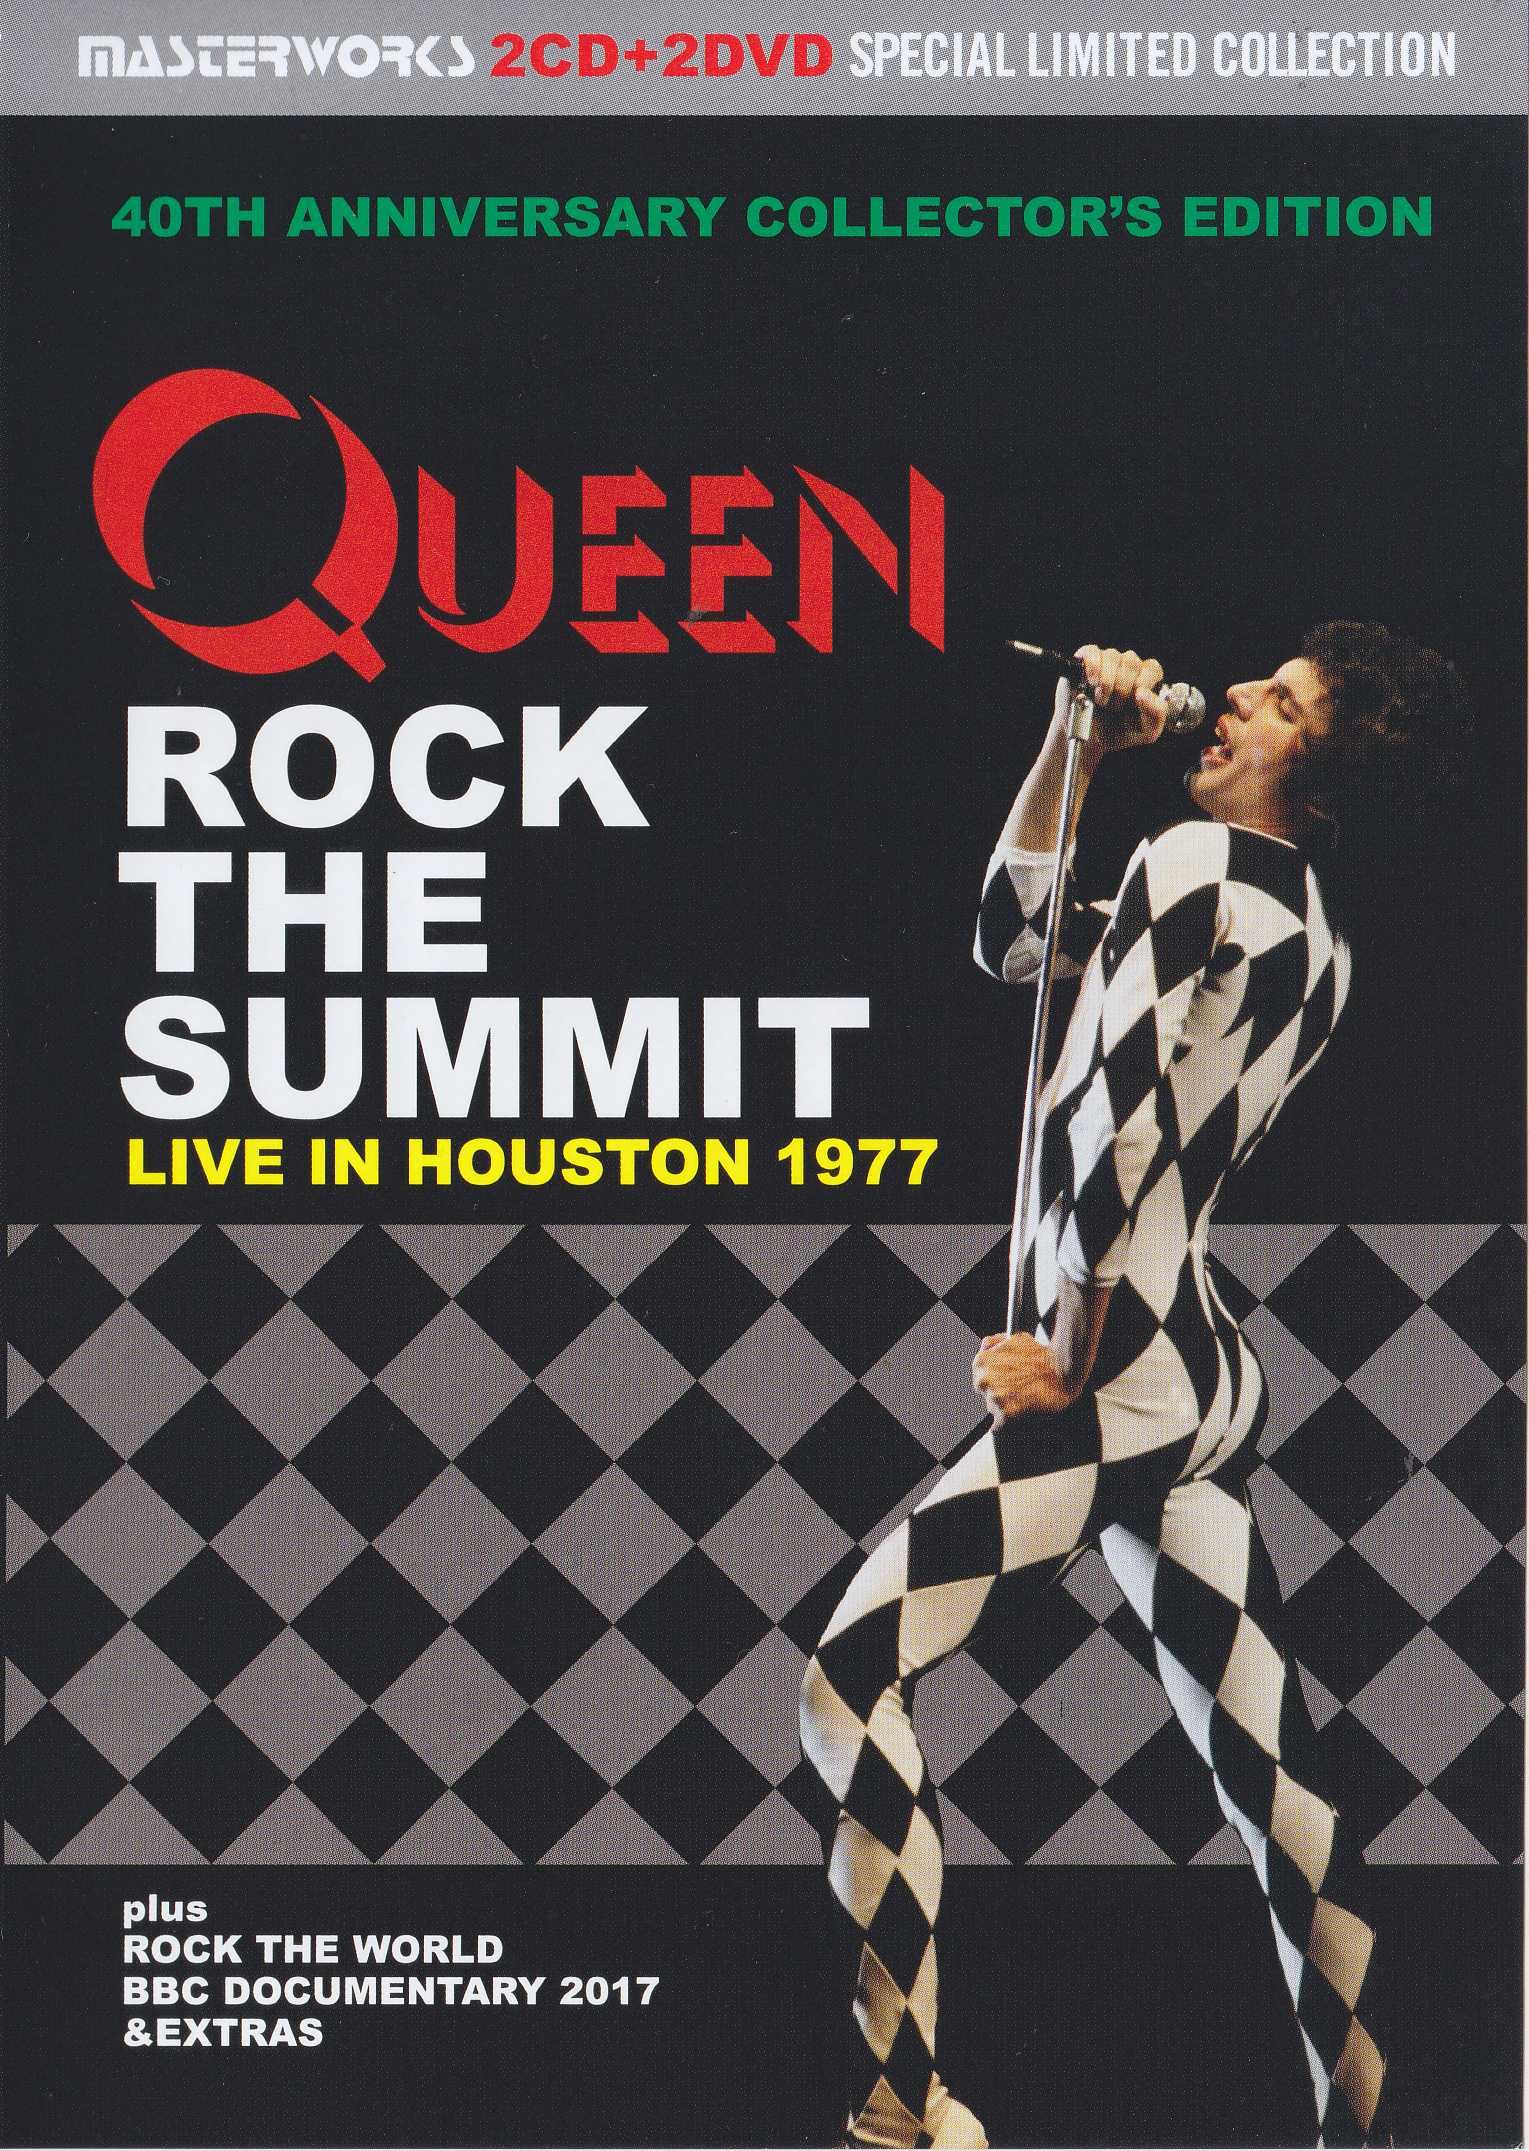 Queen / Rock The Summit 40th Anniversary Collectors Edition